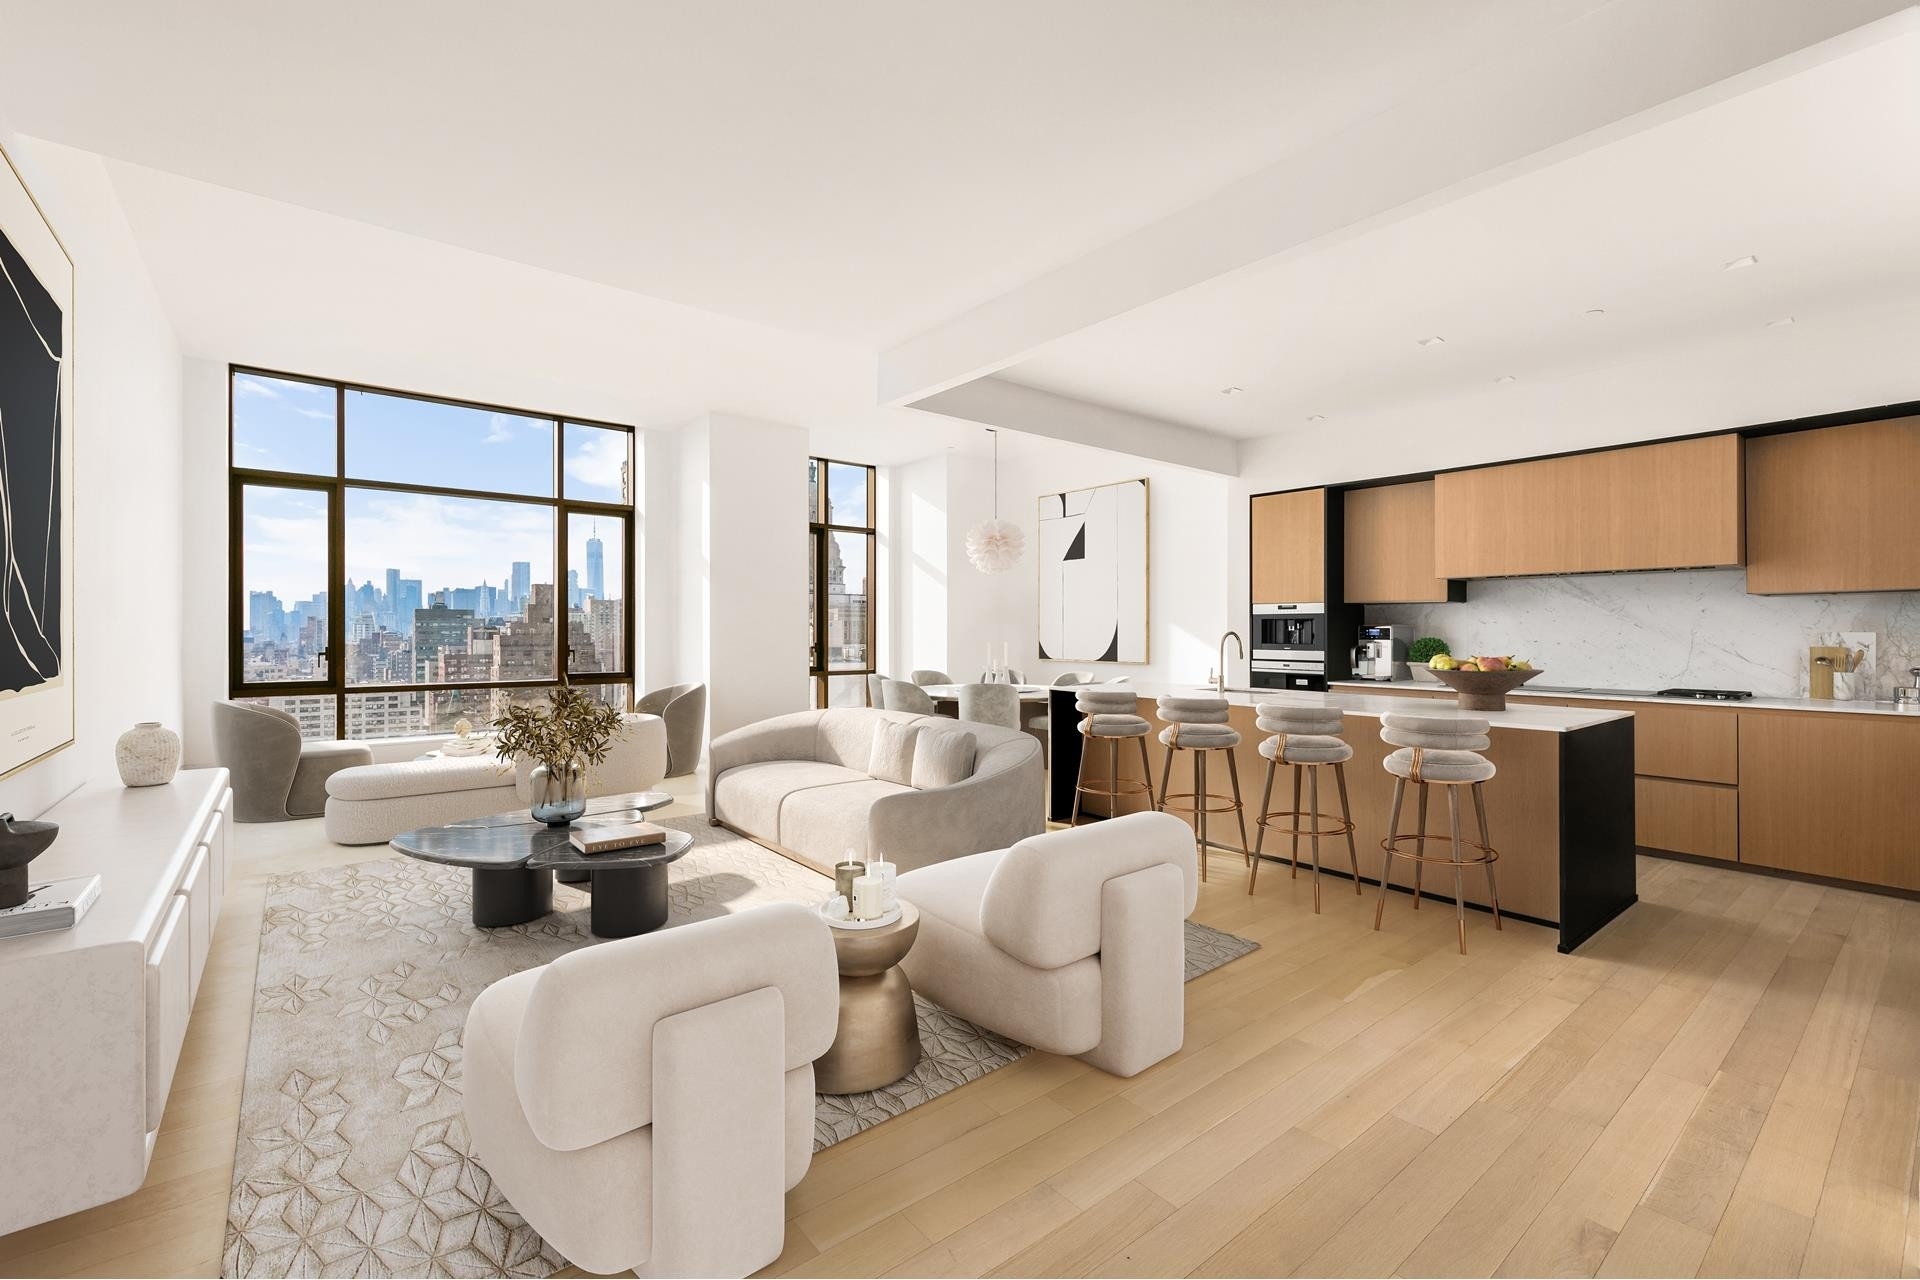 Property at Gramercy Square, 215 E 19TH ST, 16A Gramercy Park, New York, New York 10003